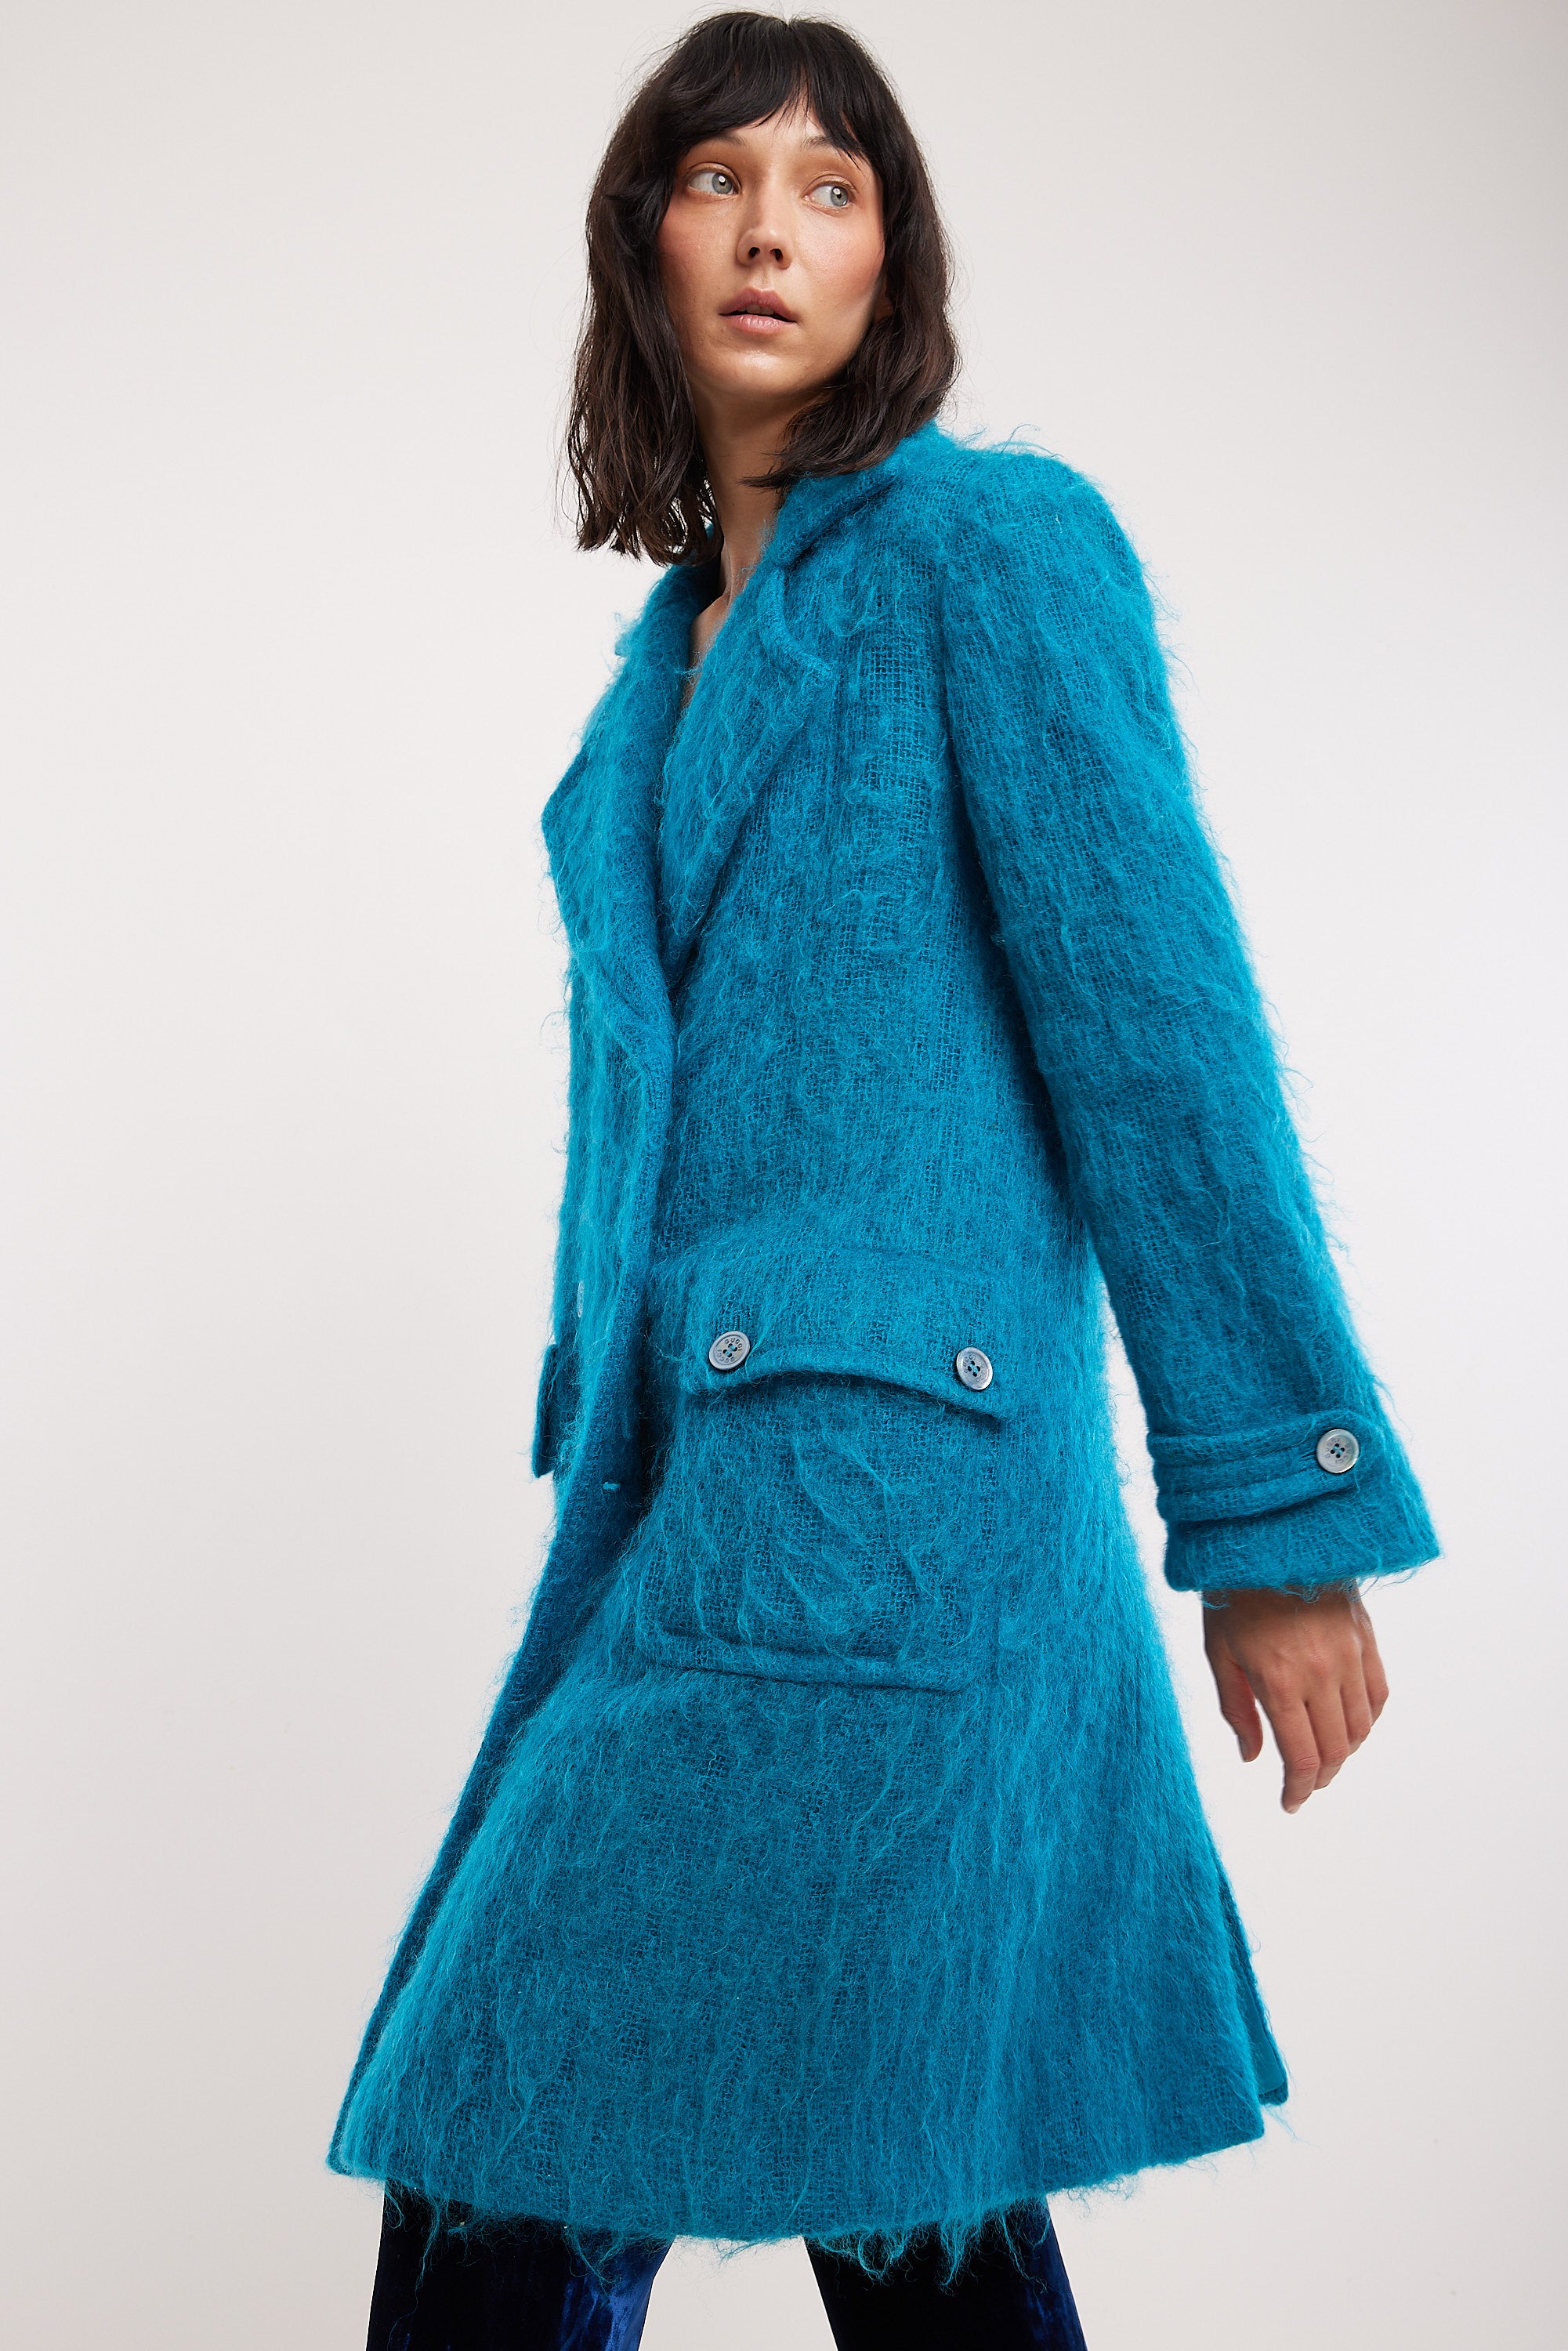 Gucci <br> Tom Ford F/W 1995 runway & campaign mohair coat